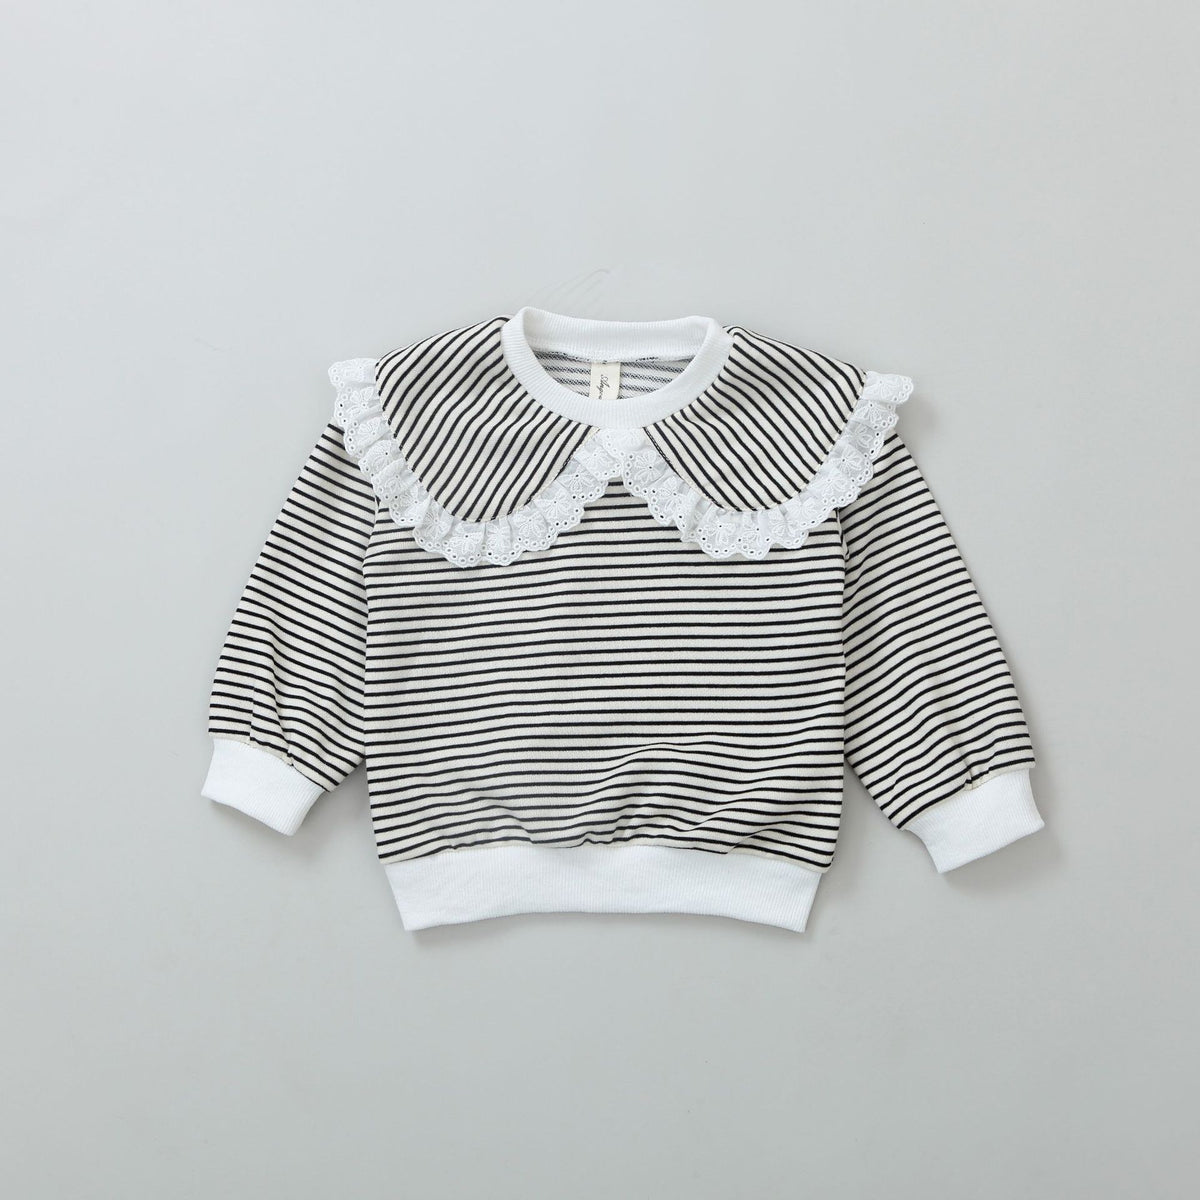 Baby Kid Girls Striped Tops Wholesale 231130149